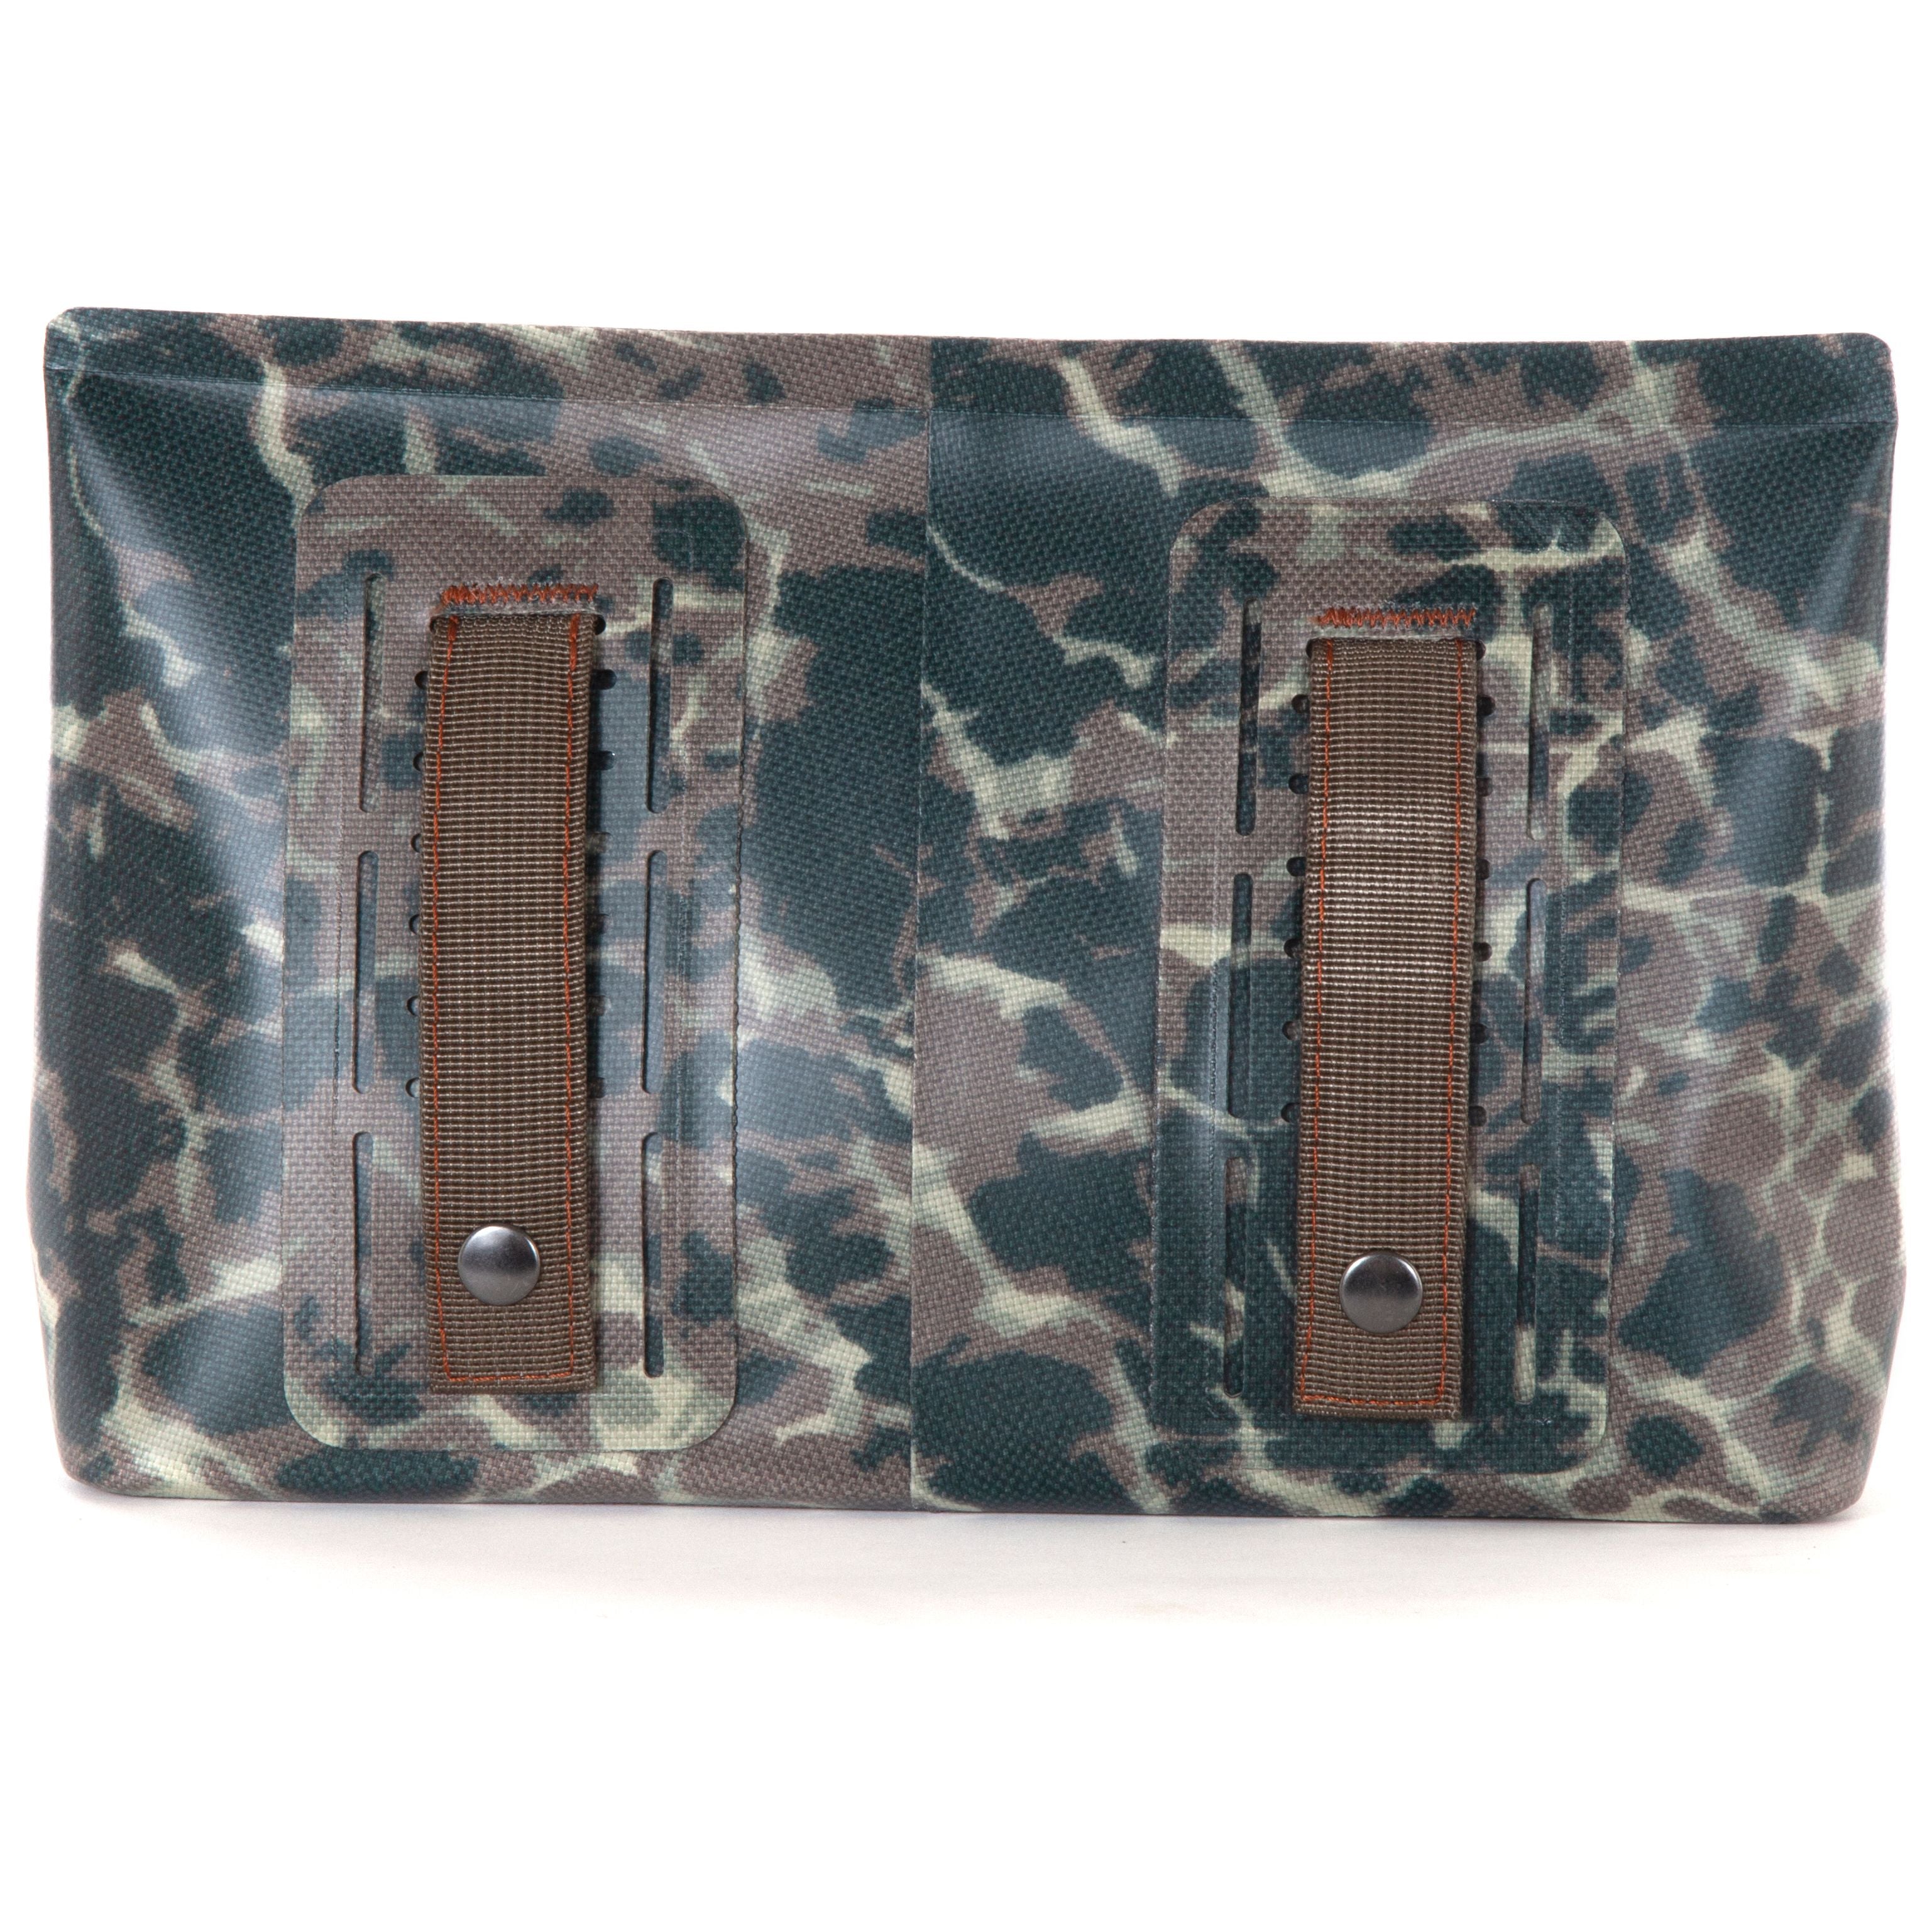 Fishpond Thunderhead Submersible Pouch Eco Riverbed Camo Image 02